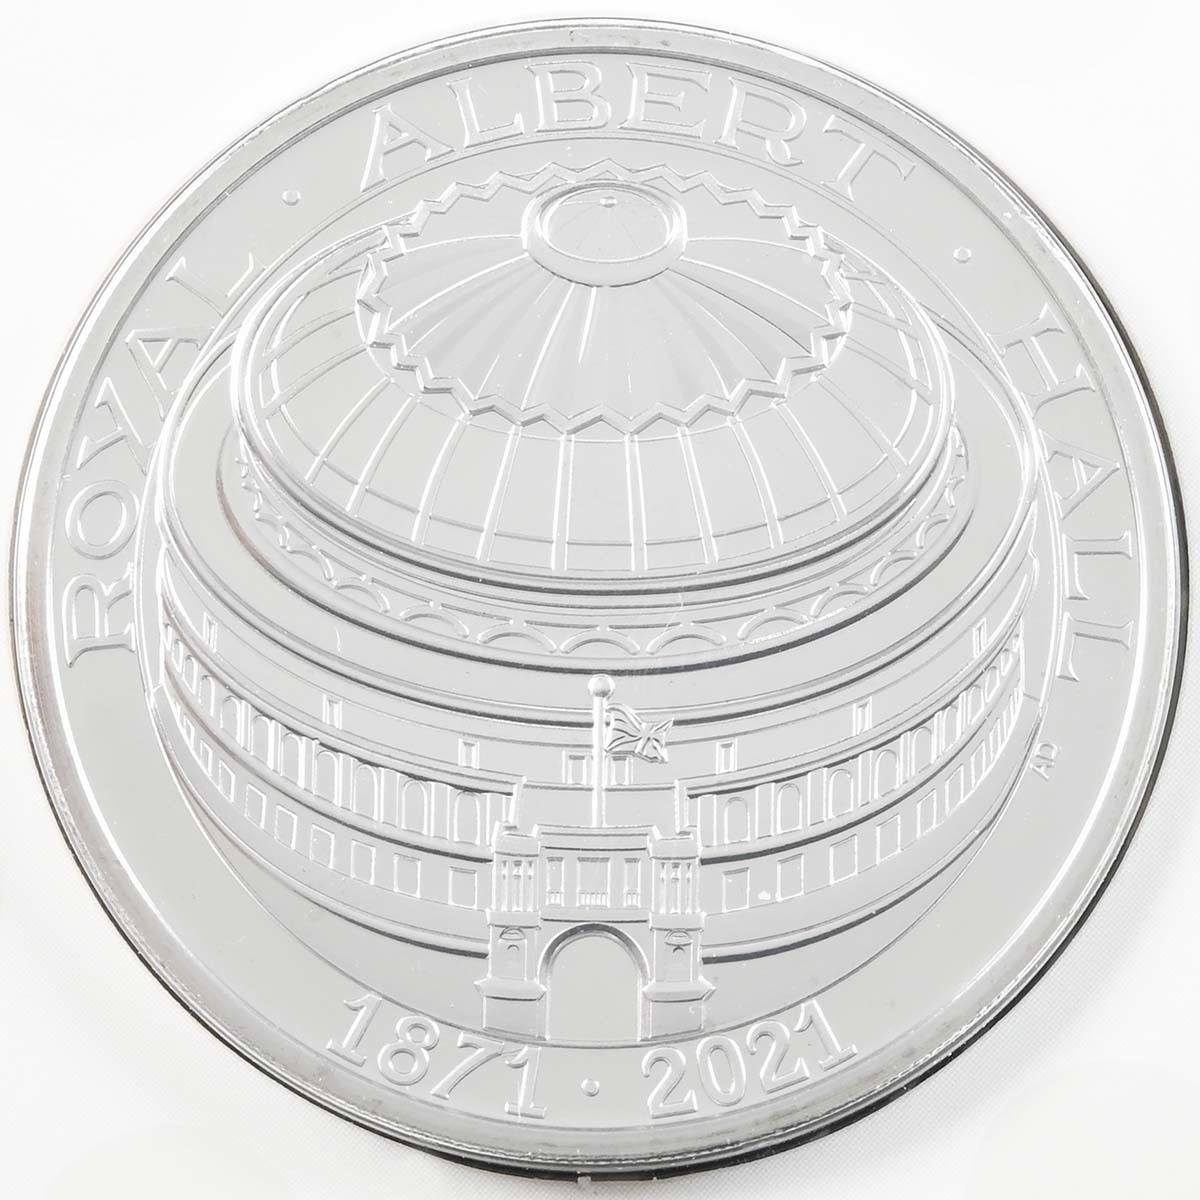 UK21AHBU 2021 Royal Albert Hall 150th Anniversary Five Pound Crown Brilliant Uncirculated Coin In Folder Reverse